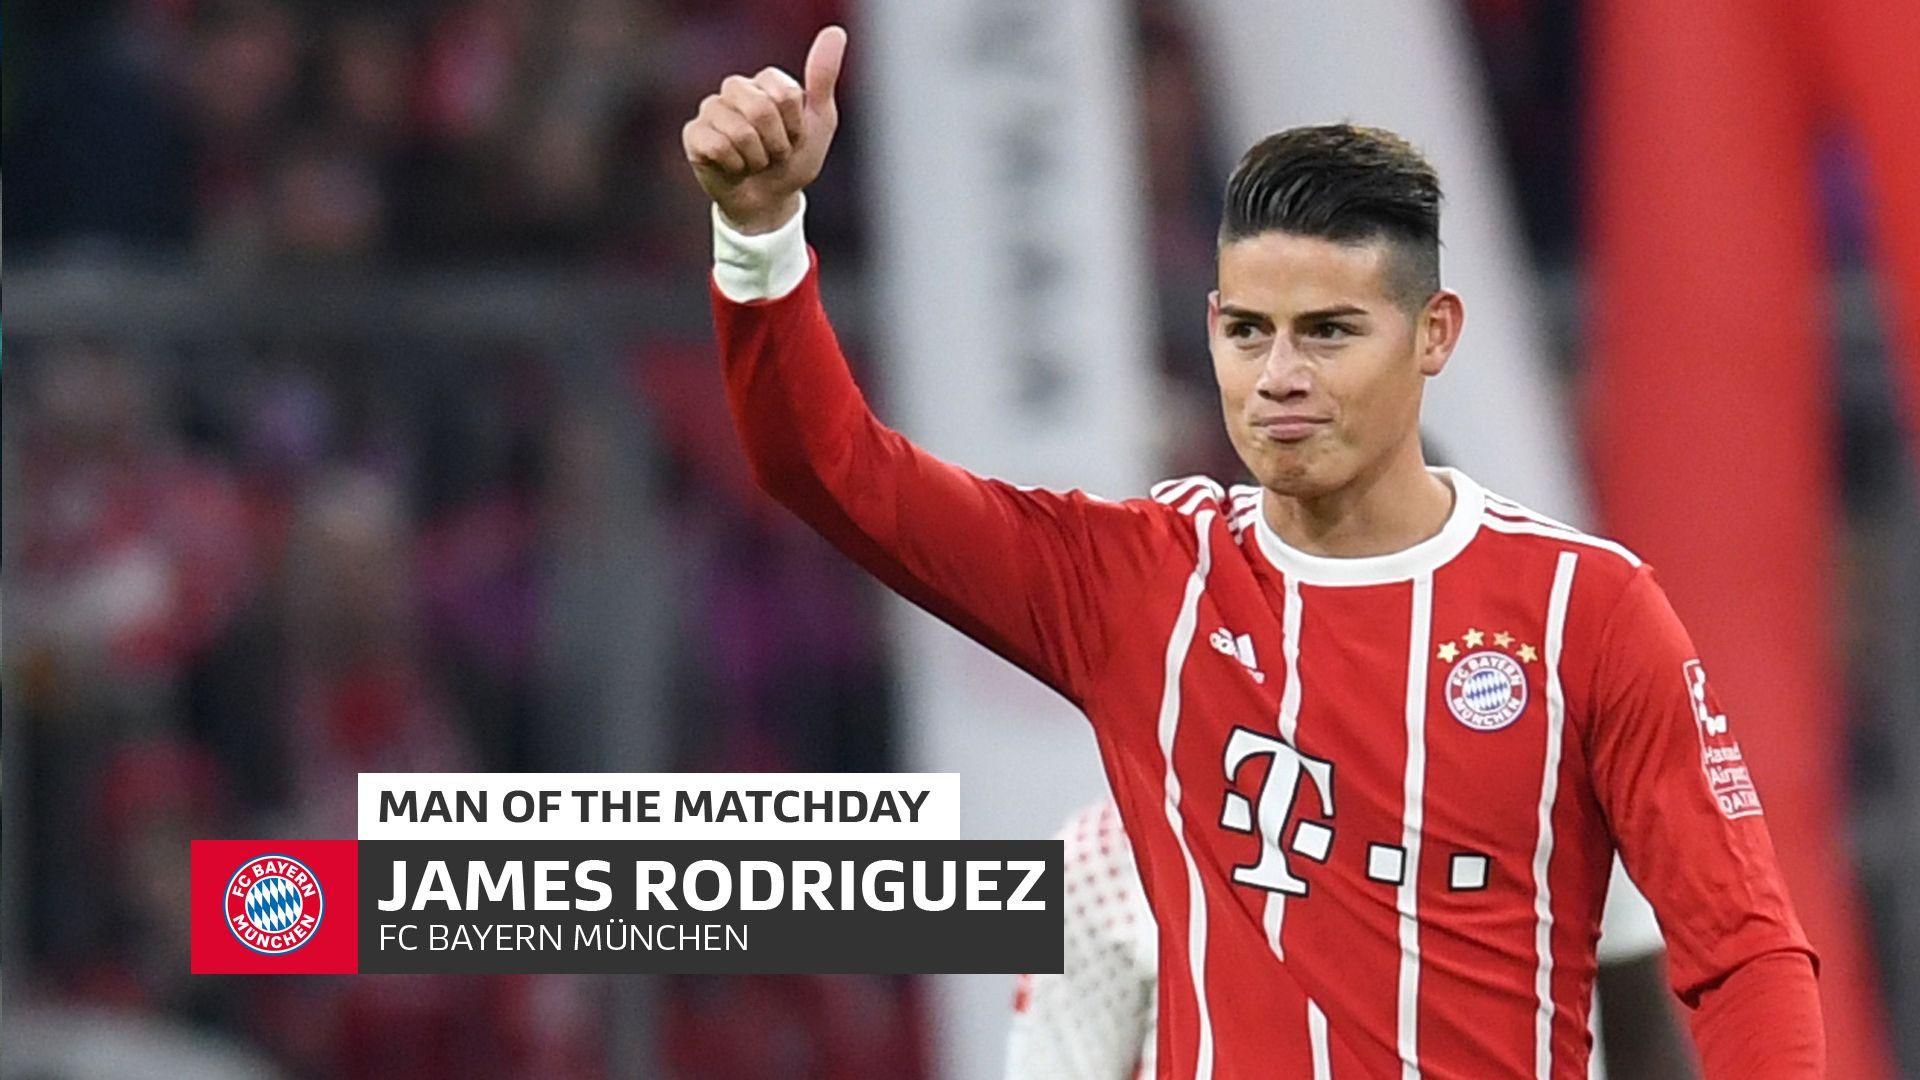 James Rodriguez: MD10's Man of the Matchday